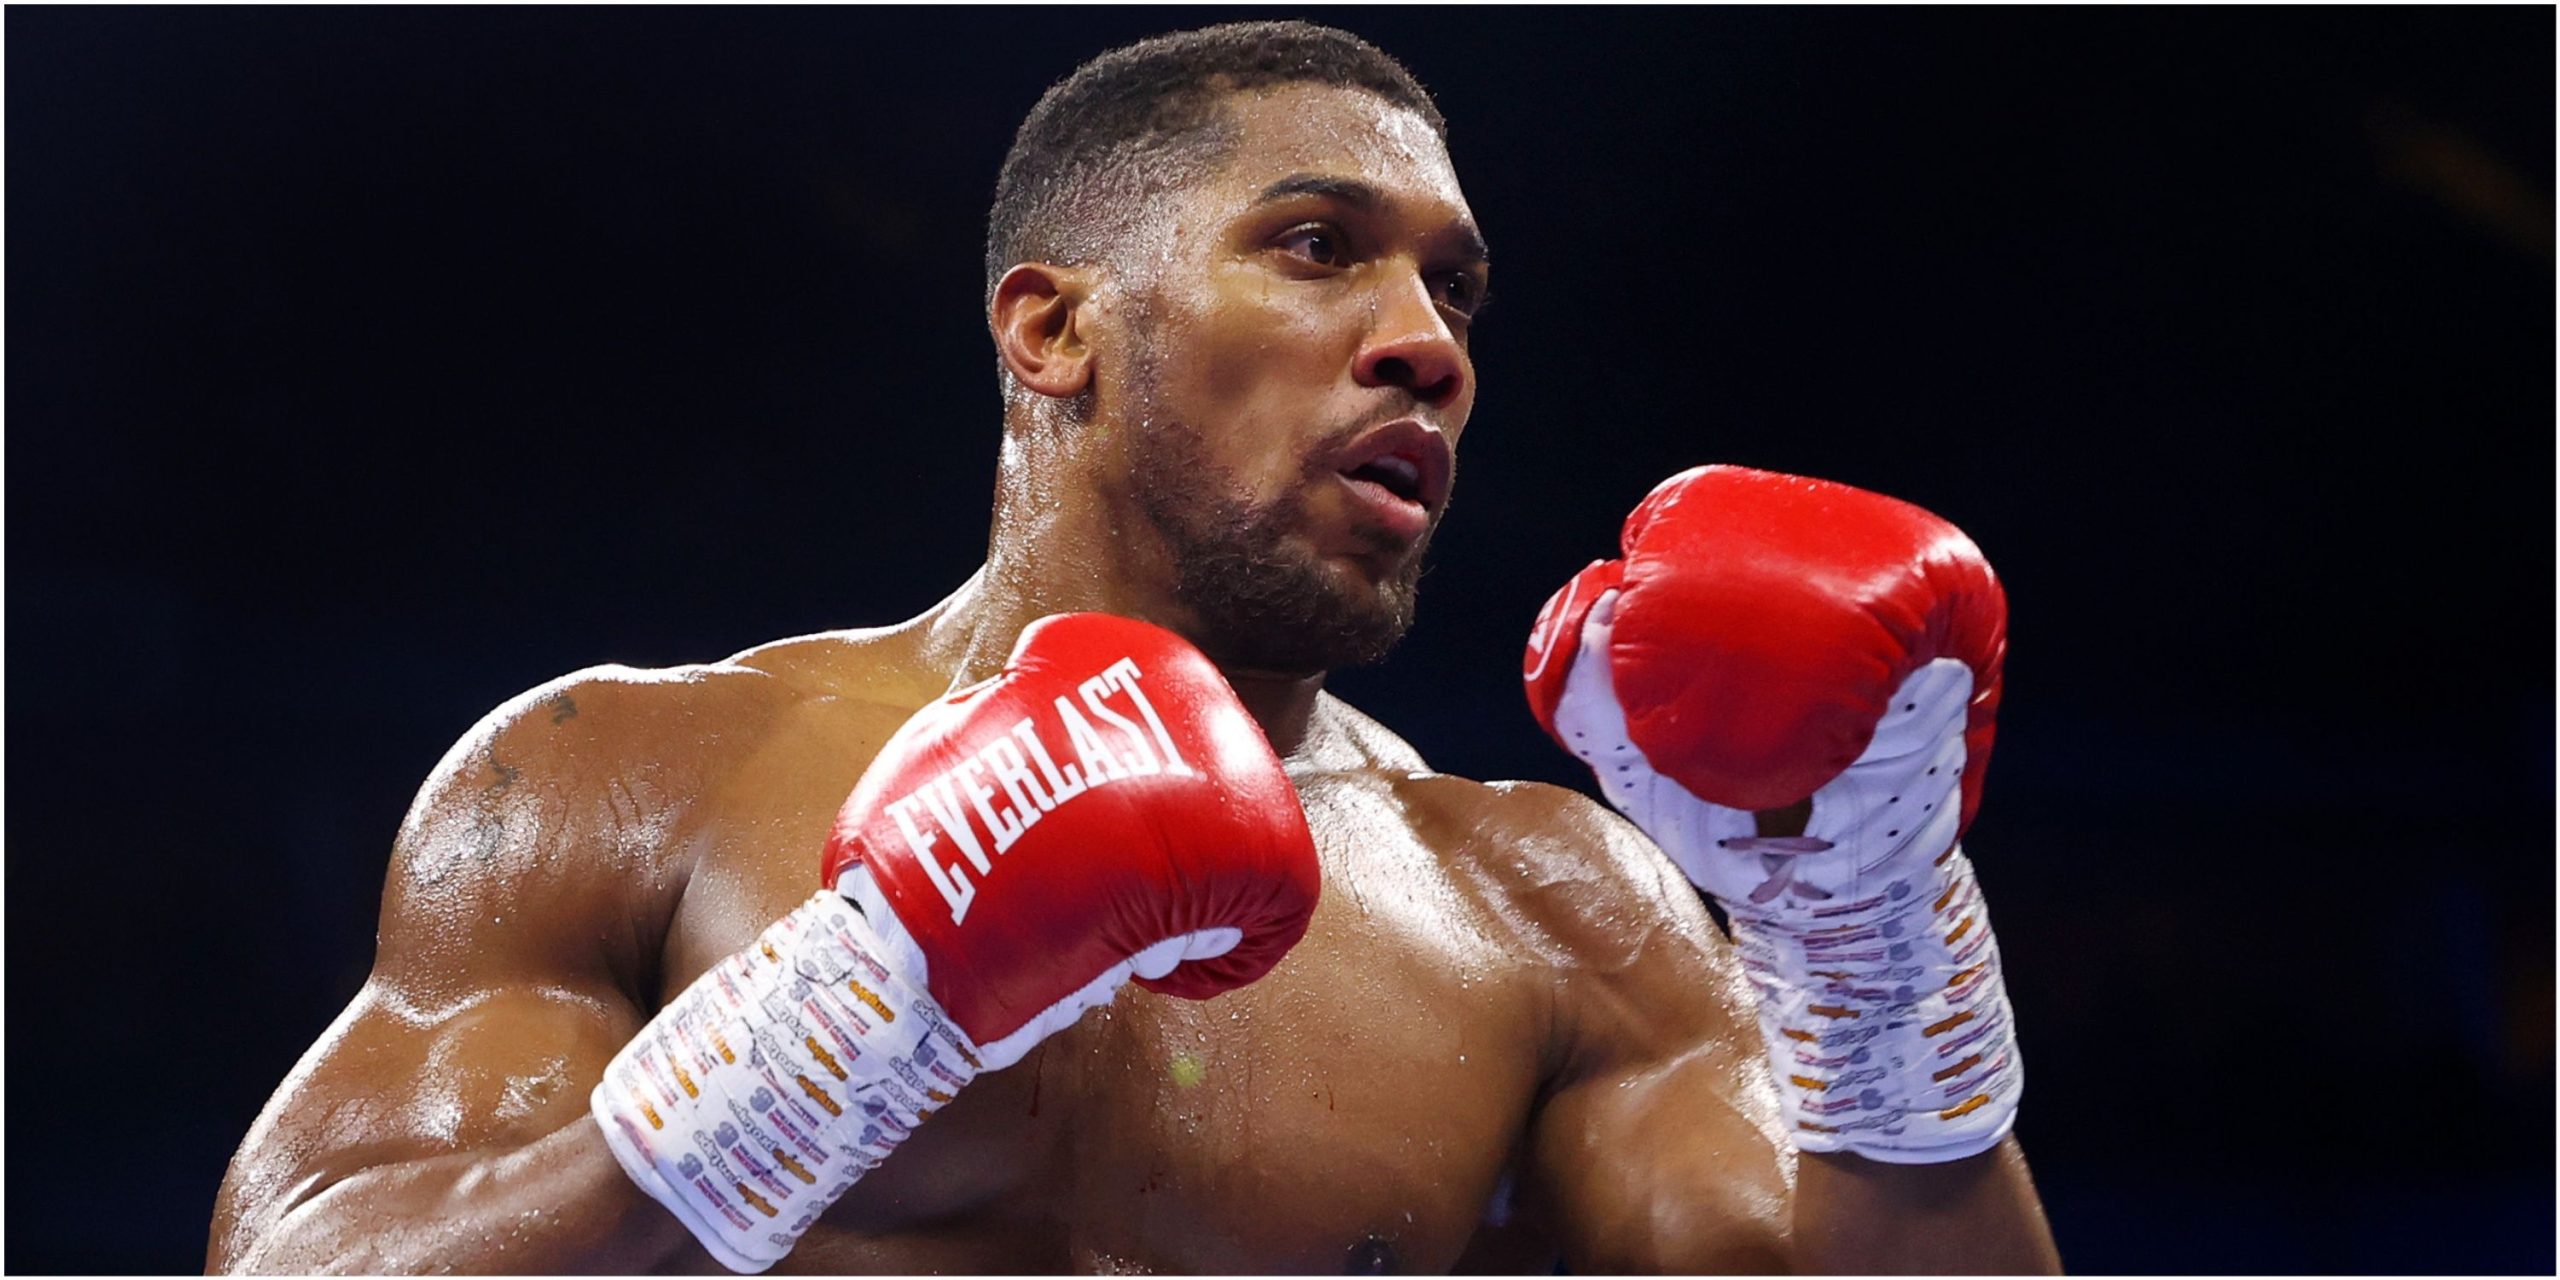 "I don't have long" -- Anthony Joshua hints at what's coming next